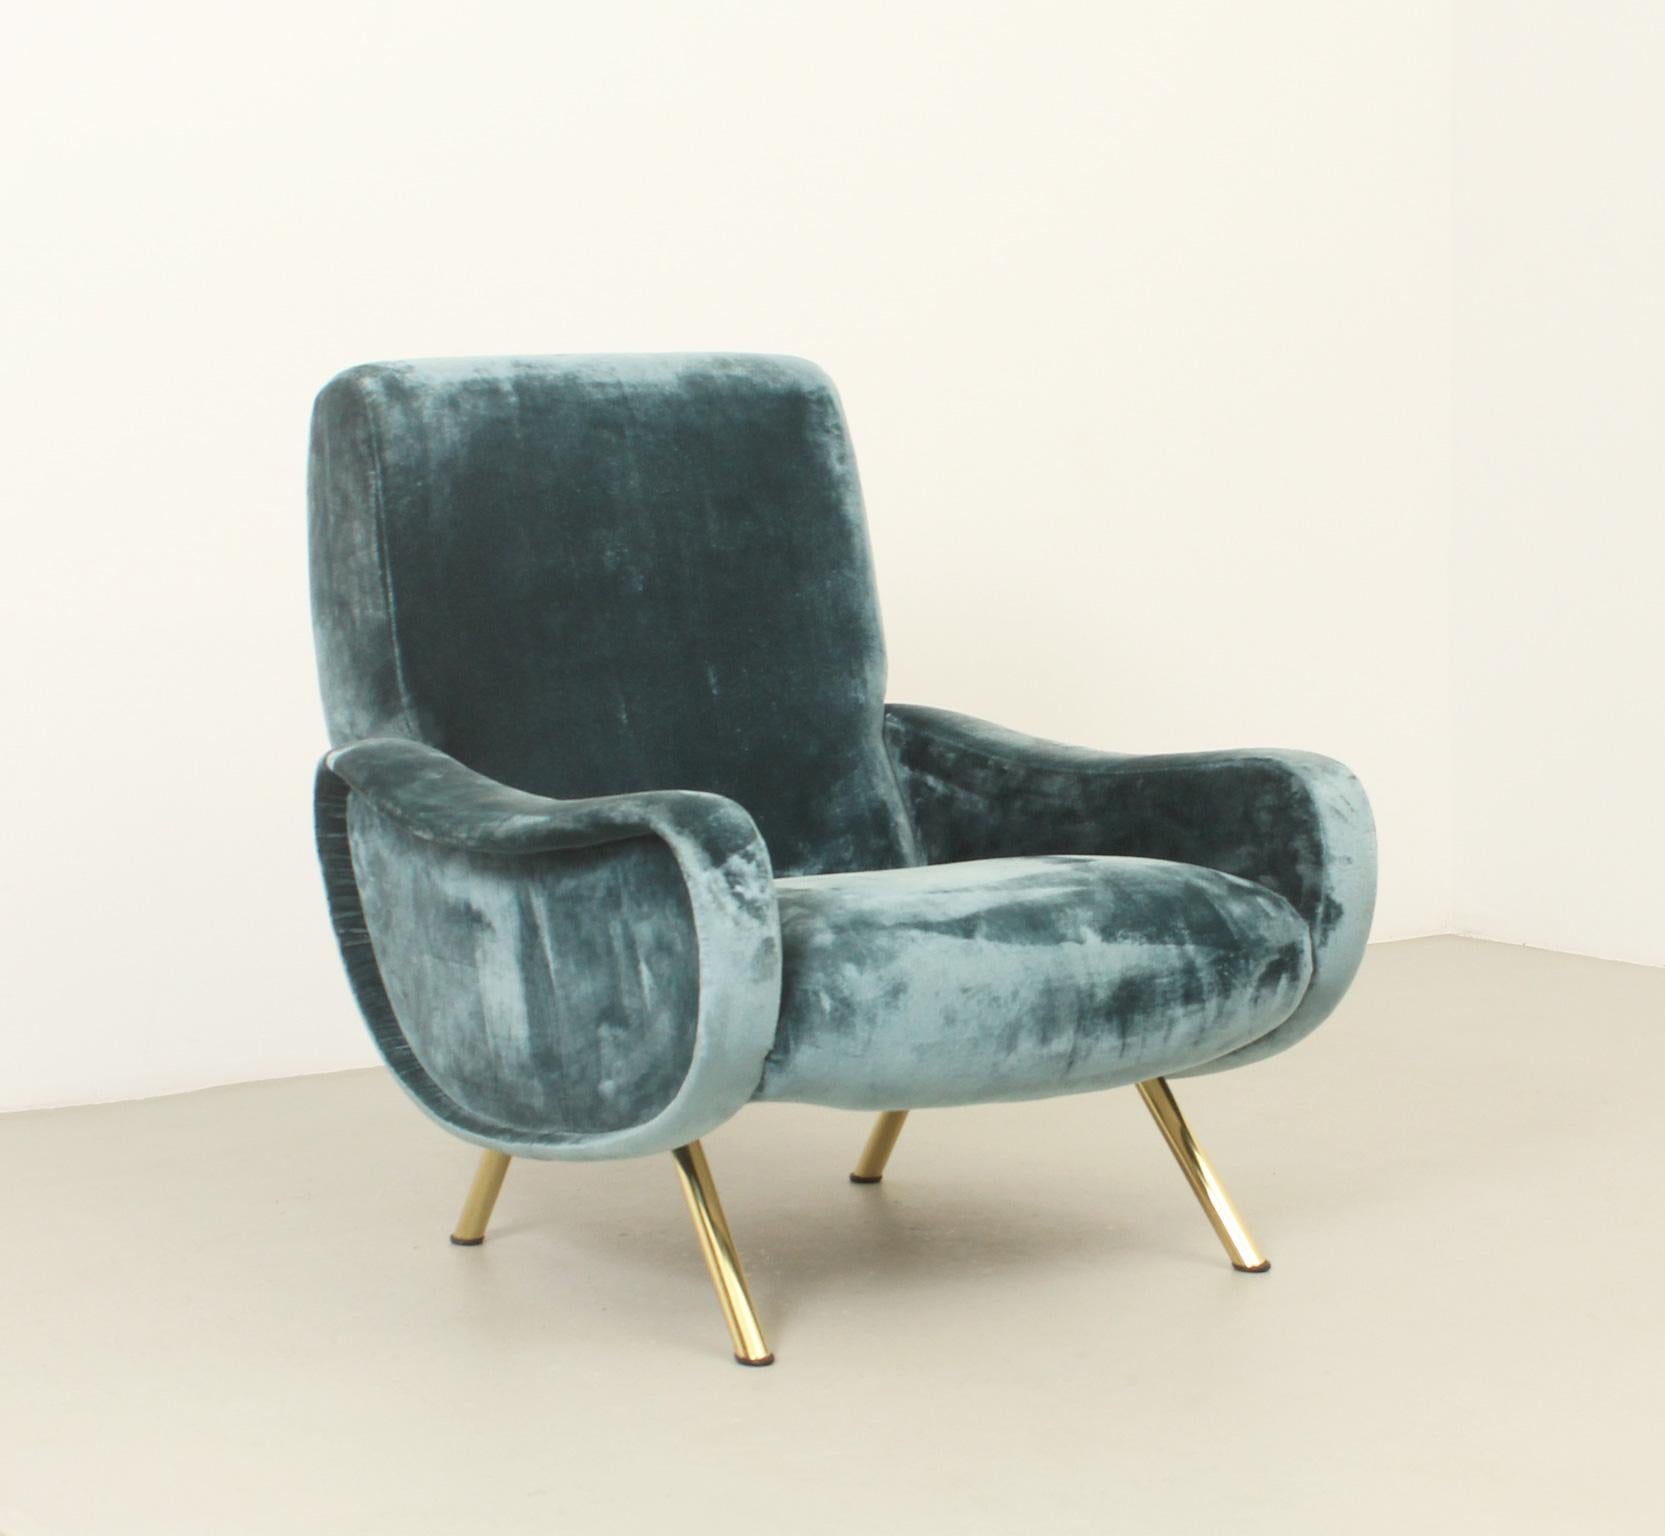 Lady armchair designed by Marco Zanuso in 1951 for Arflex, Italy. Early edition with original velvet fabric and brass bases. 